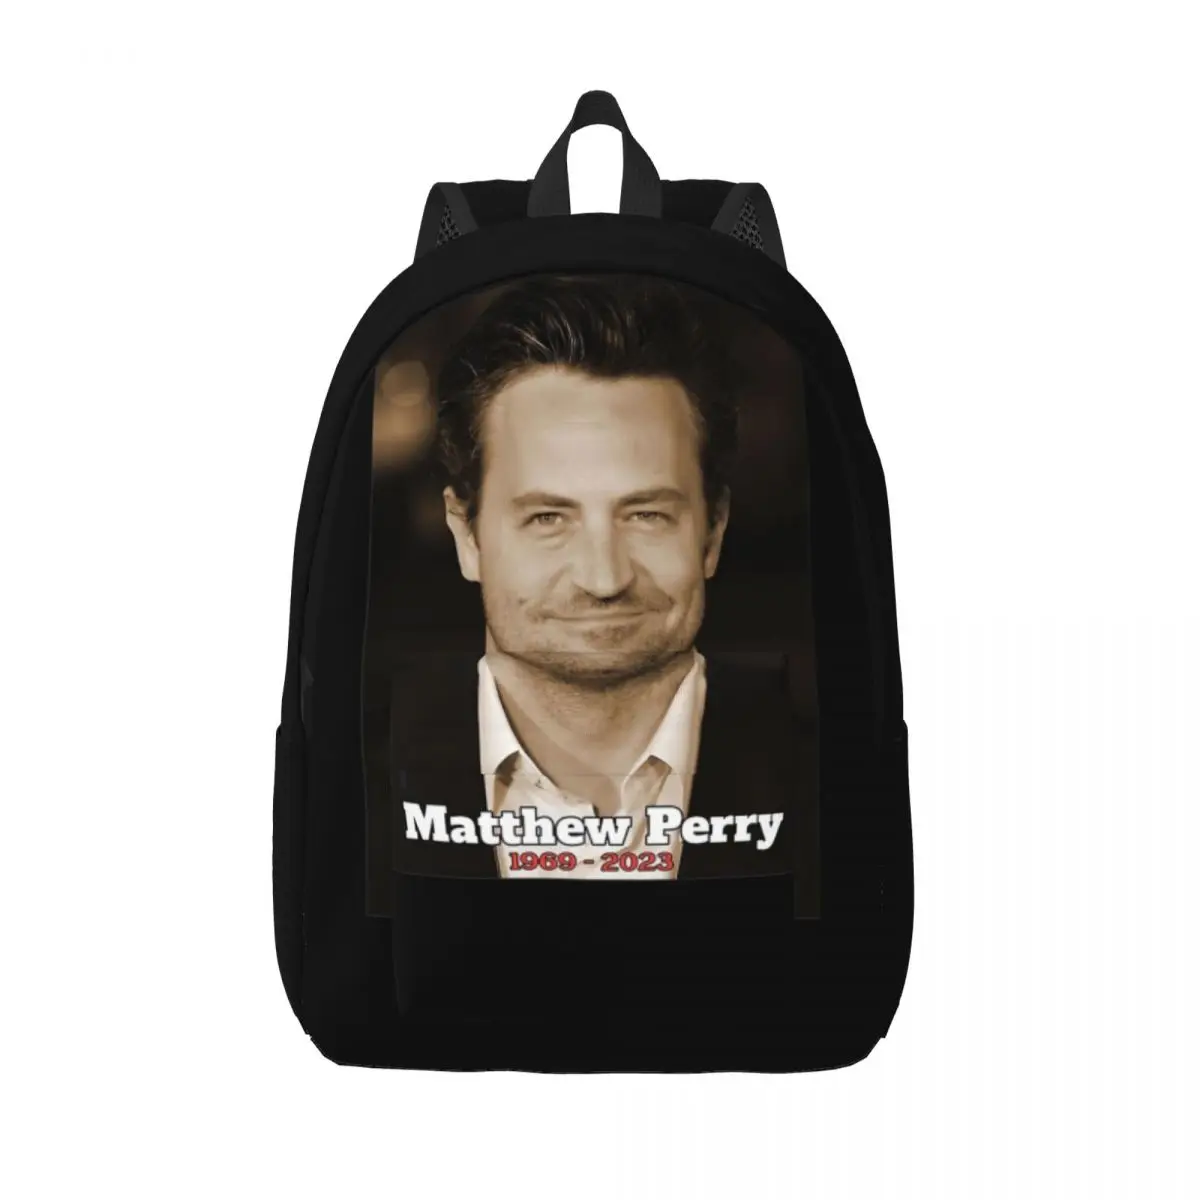 

Rip Matthew Perry 1969 2023 Fashion Backpack Outdoor Student Business Thank You Memories Daypack for Men Women Laptop Bag